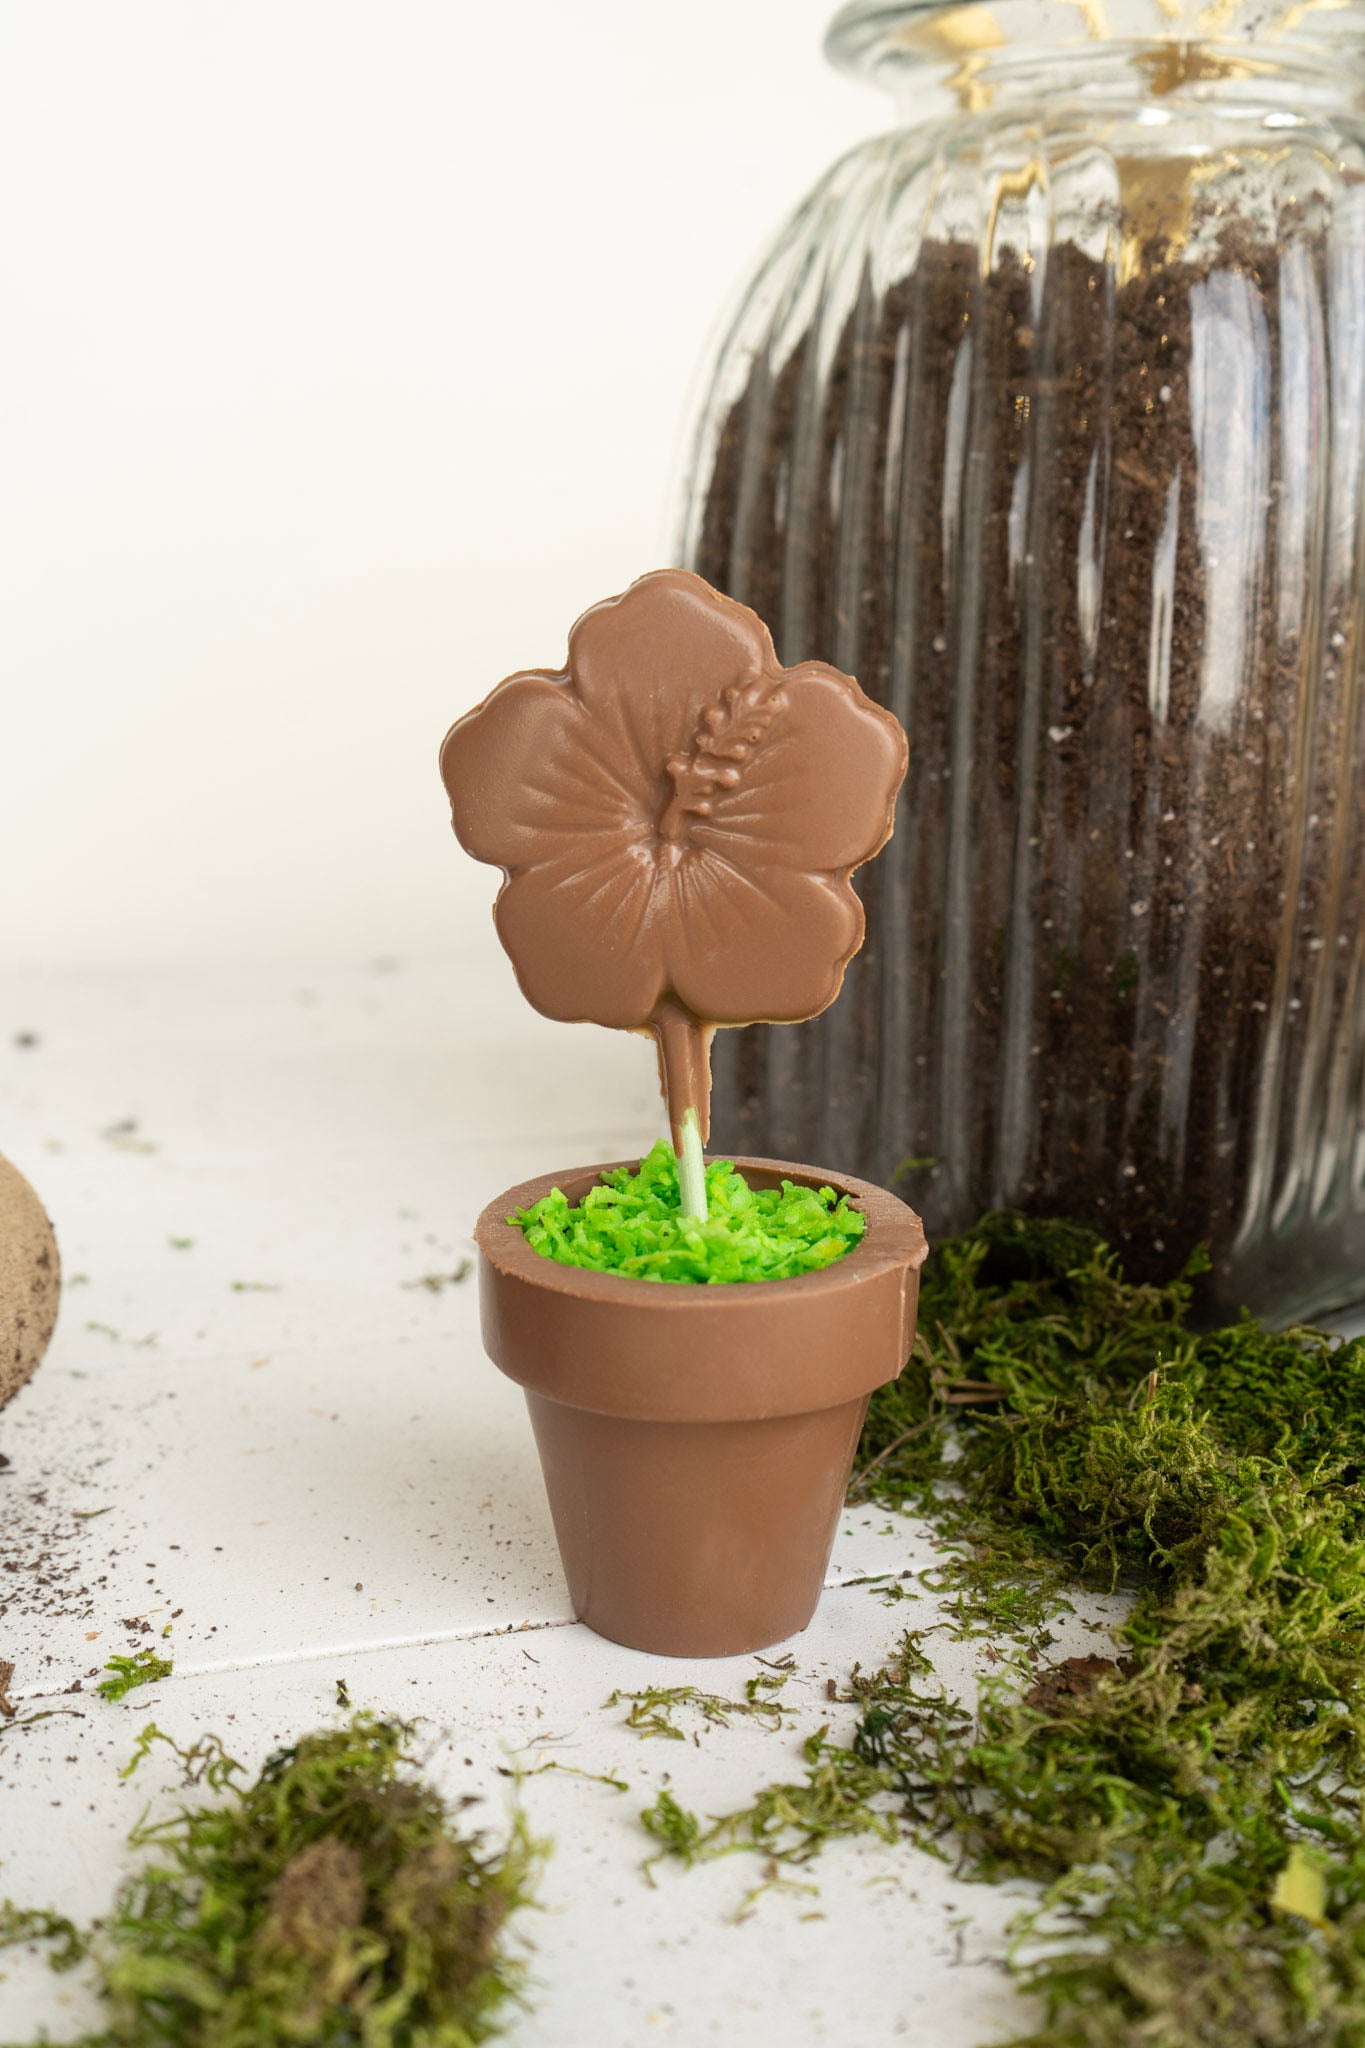 Chocolate Flower Pot with Pop and Oreo Dirt